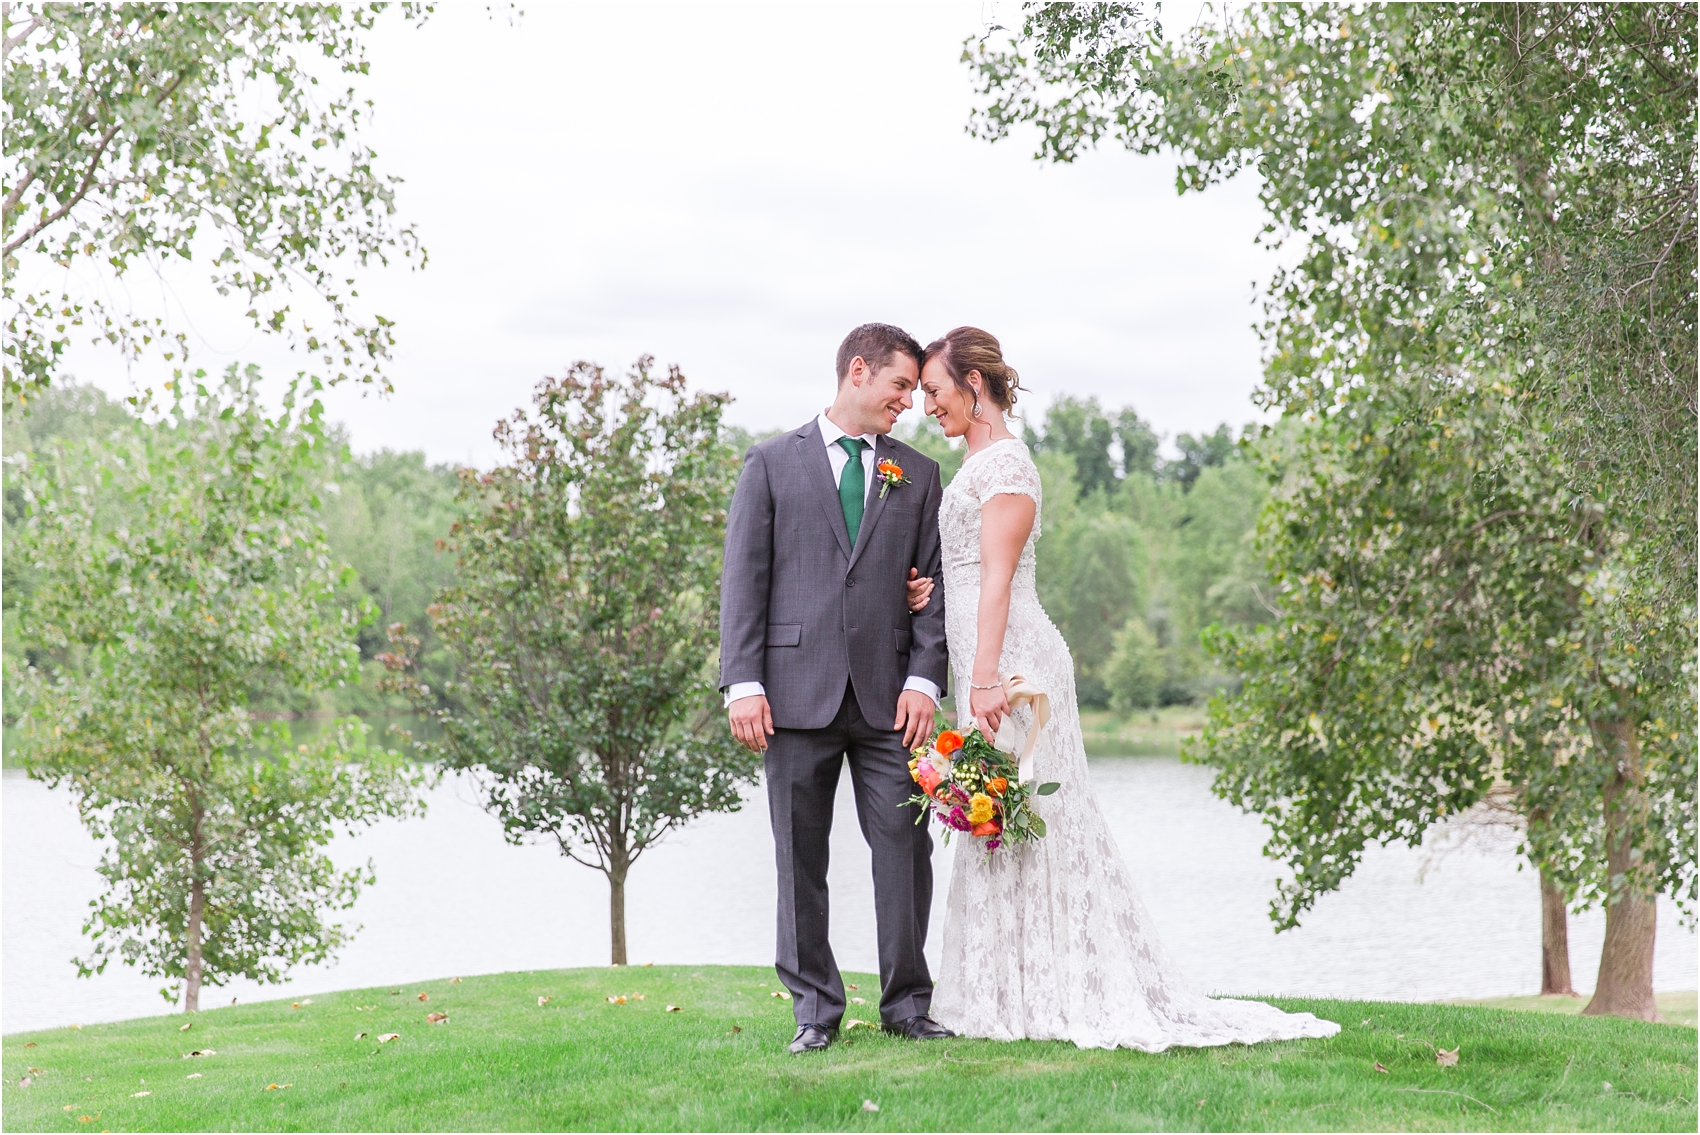 romantic-intimate-backyard-wedding-photos-at-private-estate-in-ann-arbor-mi-by-courtney-carolyn-photography_0037.jpg